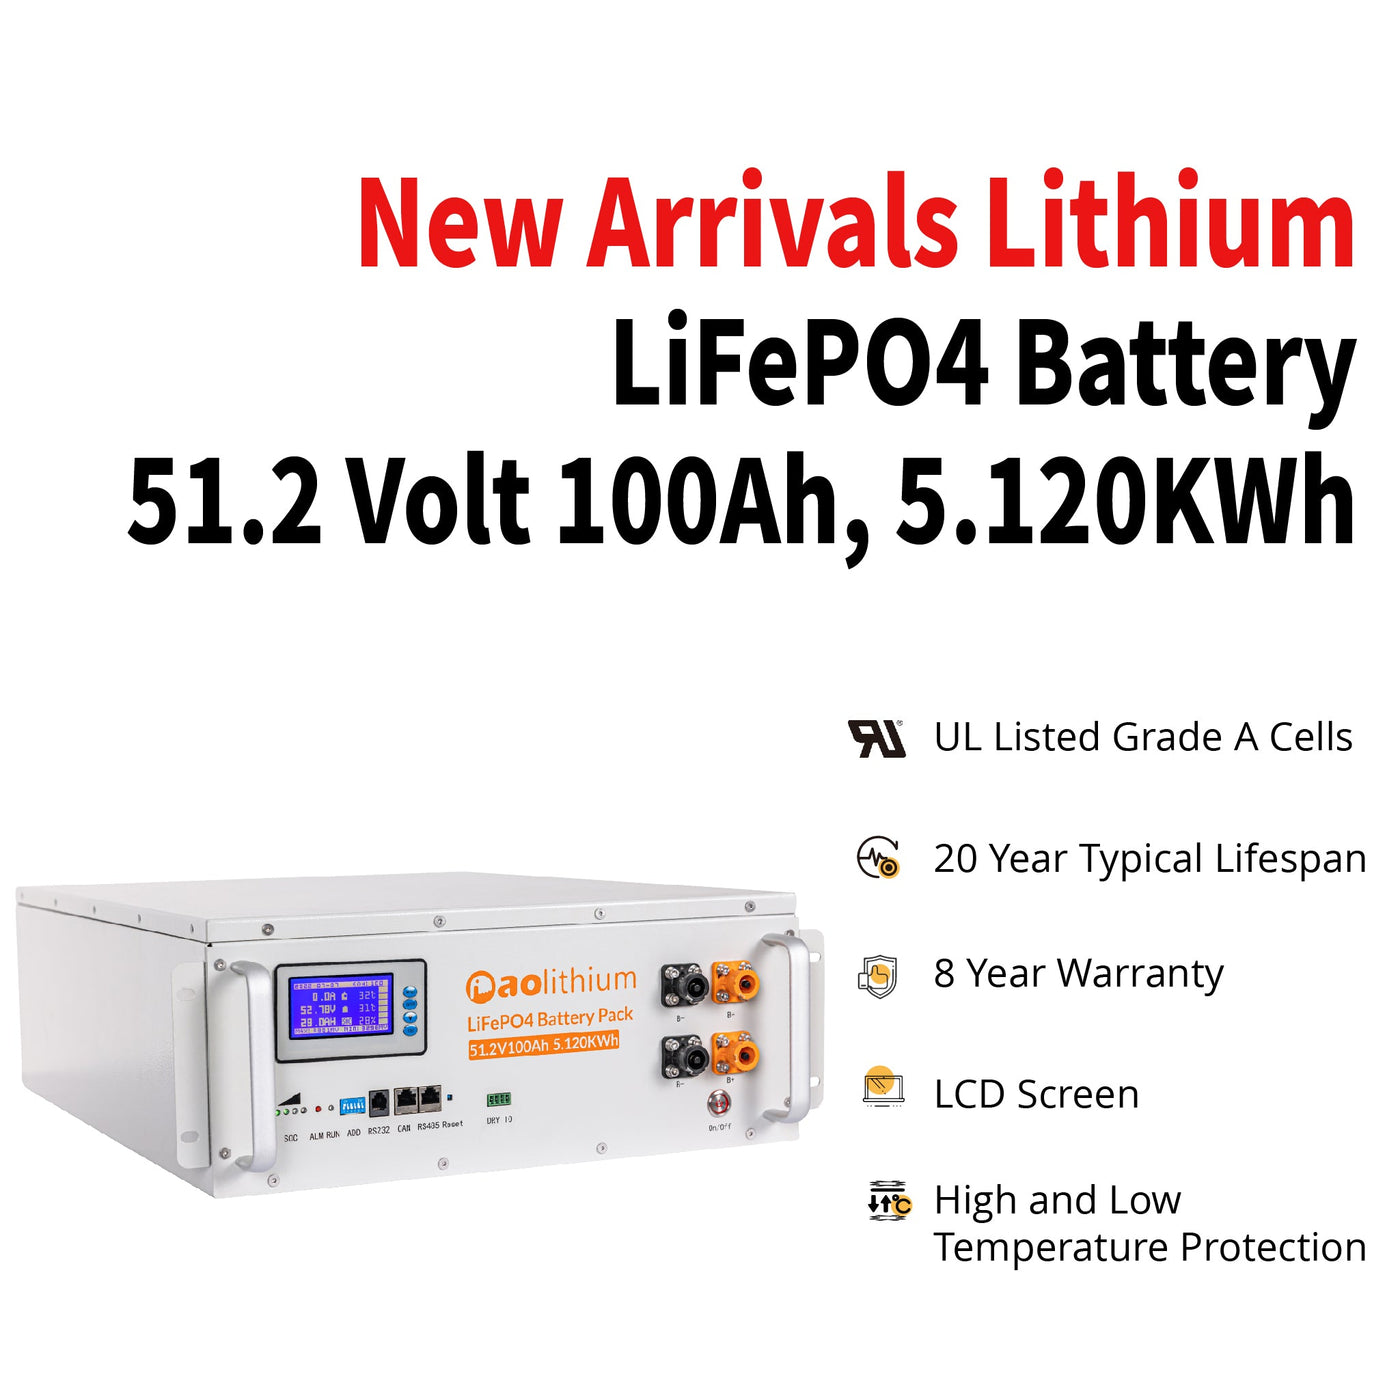 Aolithium 100Ah battery comes with smart programmable BMS and 4 temperature sensors for high and low temperature protection.